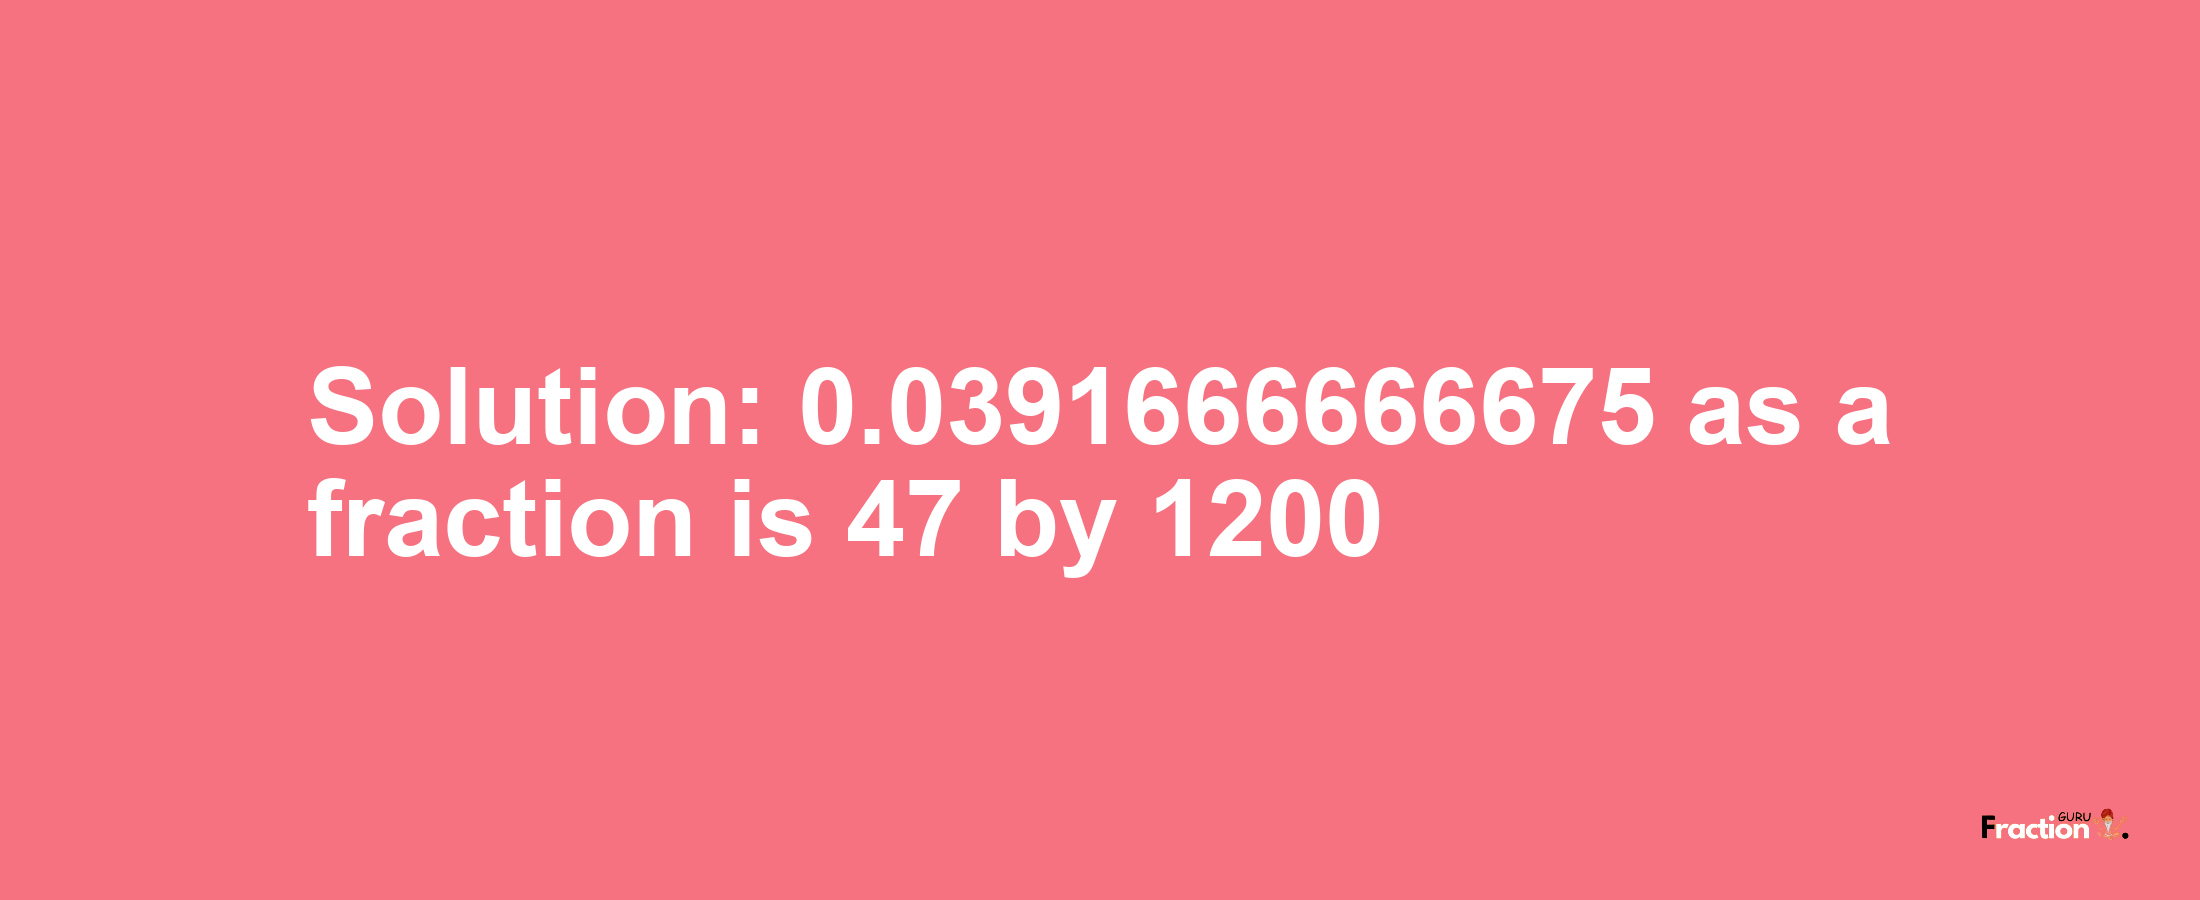 Solution:0.0391666666675 as a fraction is 47/1200